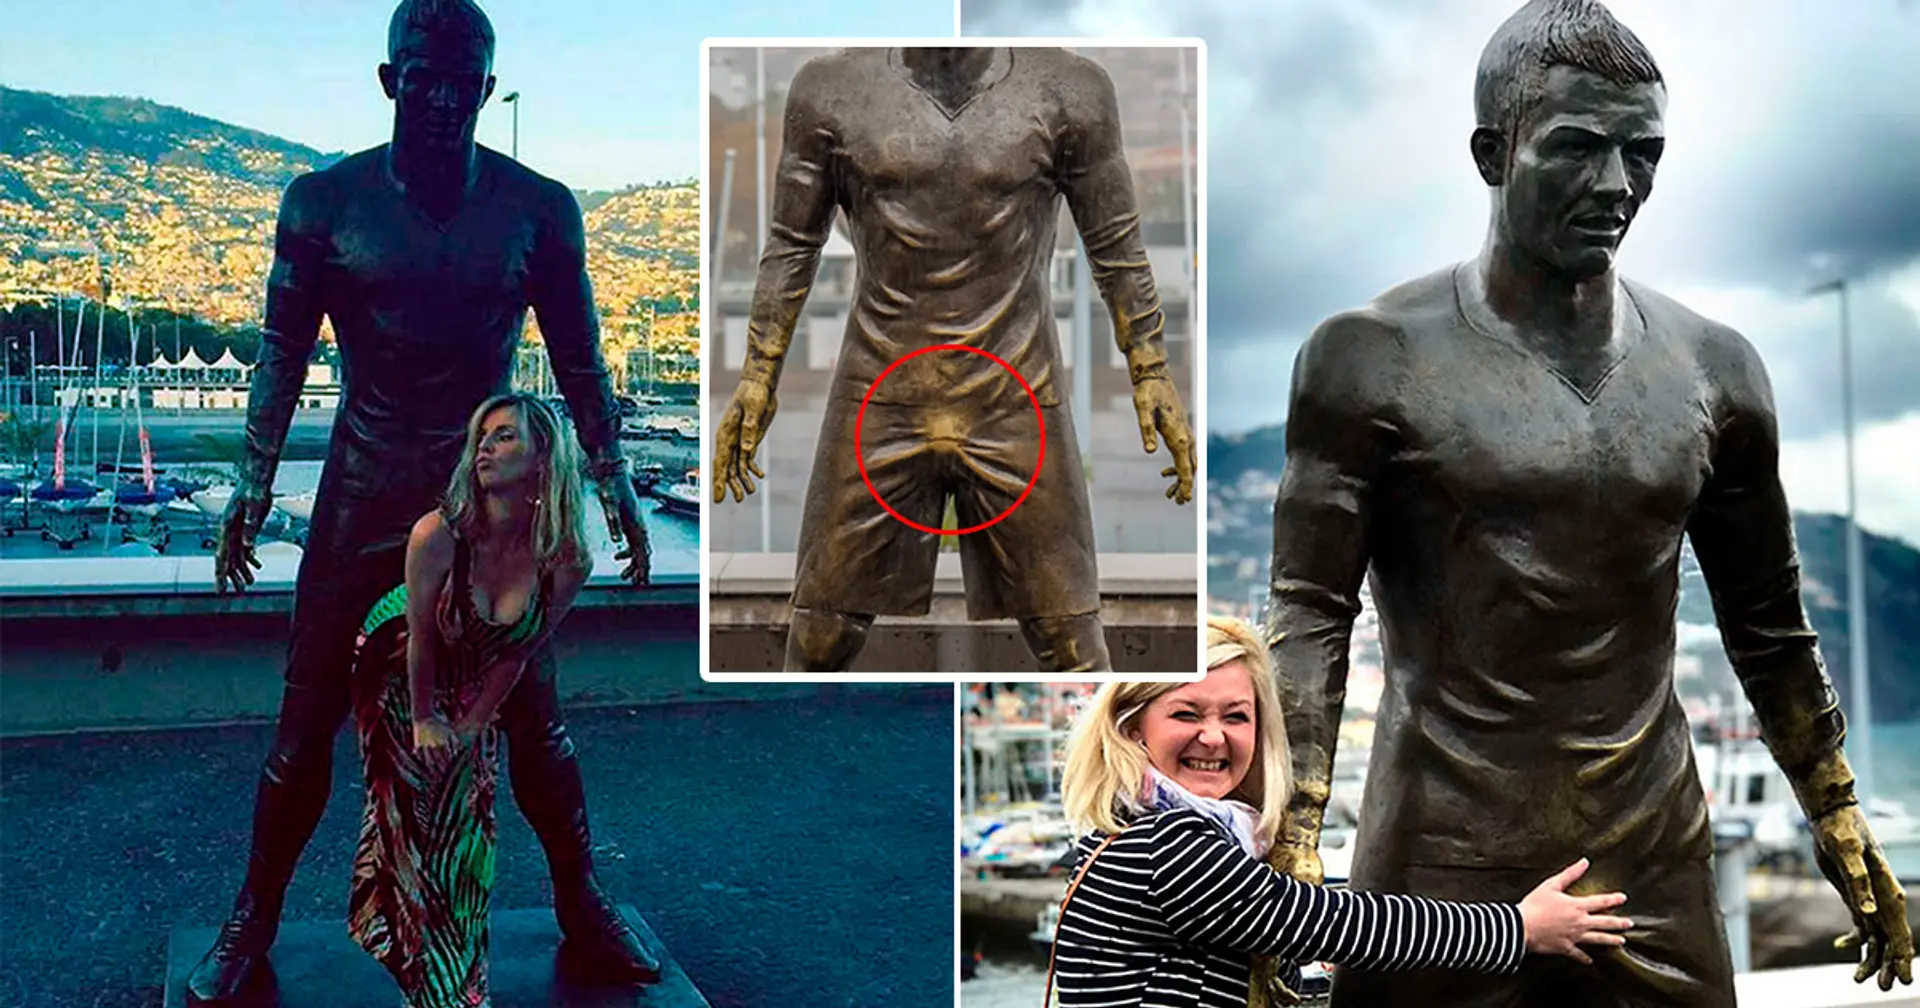 Cristiano Ronaldo statue's penis becoming worn out because of so many tourists grabbing it